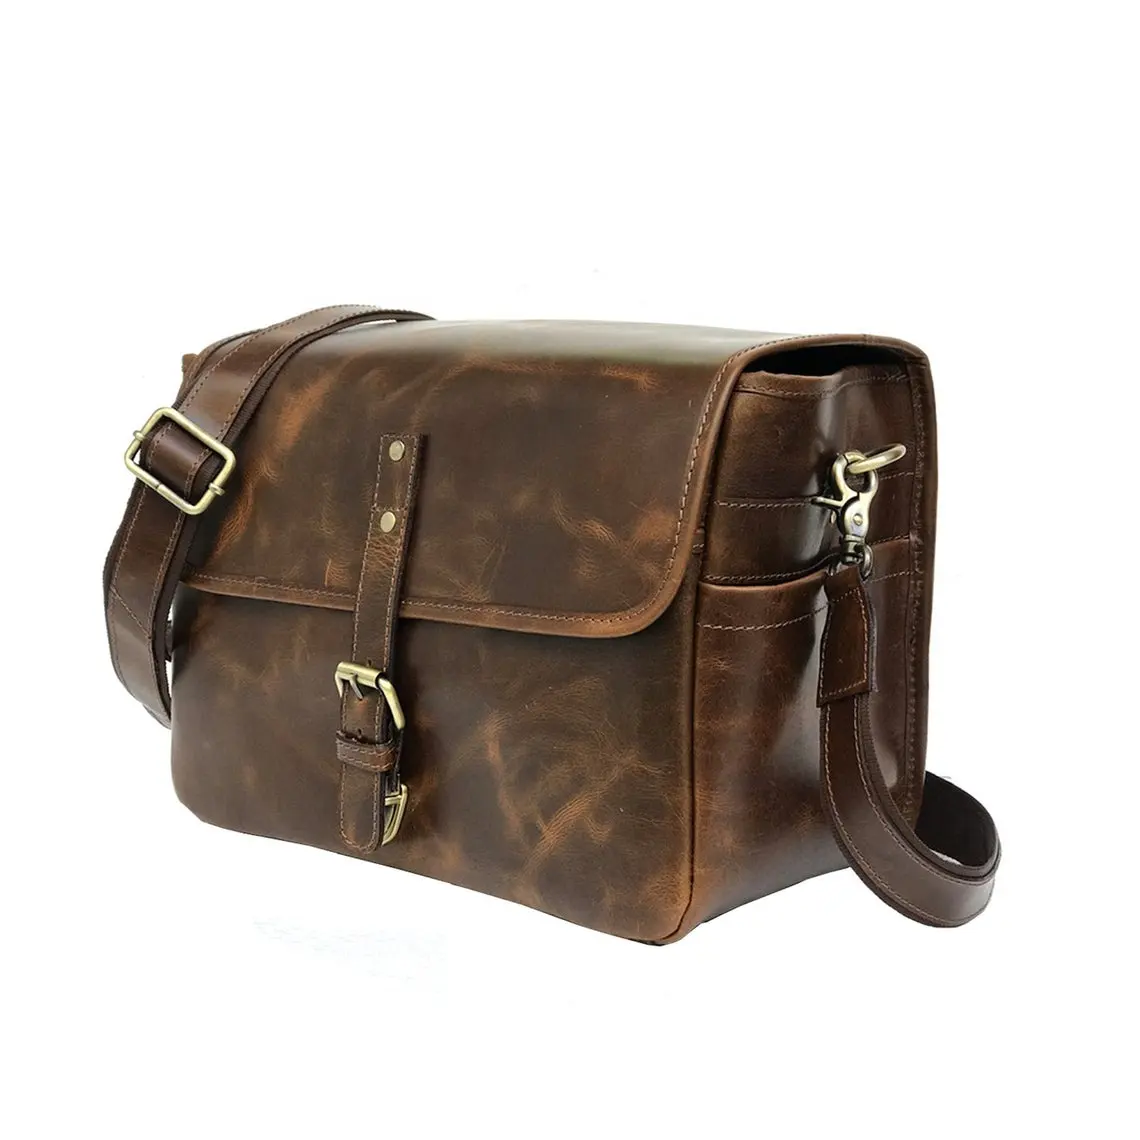 Fashionable Wholesale Handmade Real Leather Waterproof Light Weight DSLR Camera Case Bag